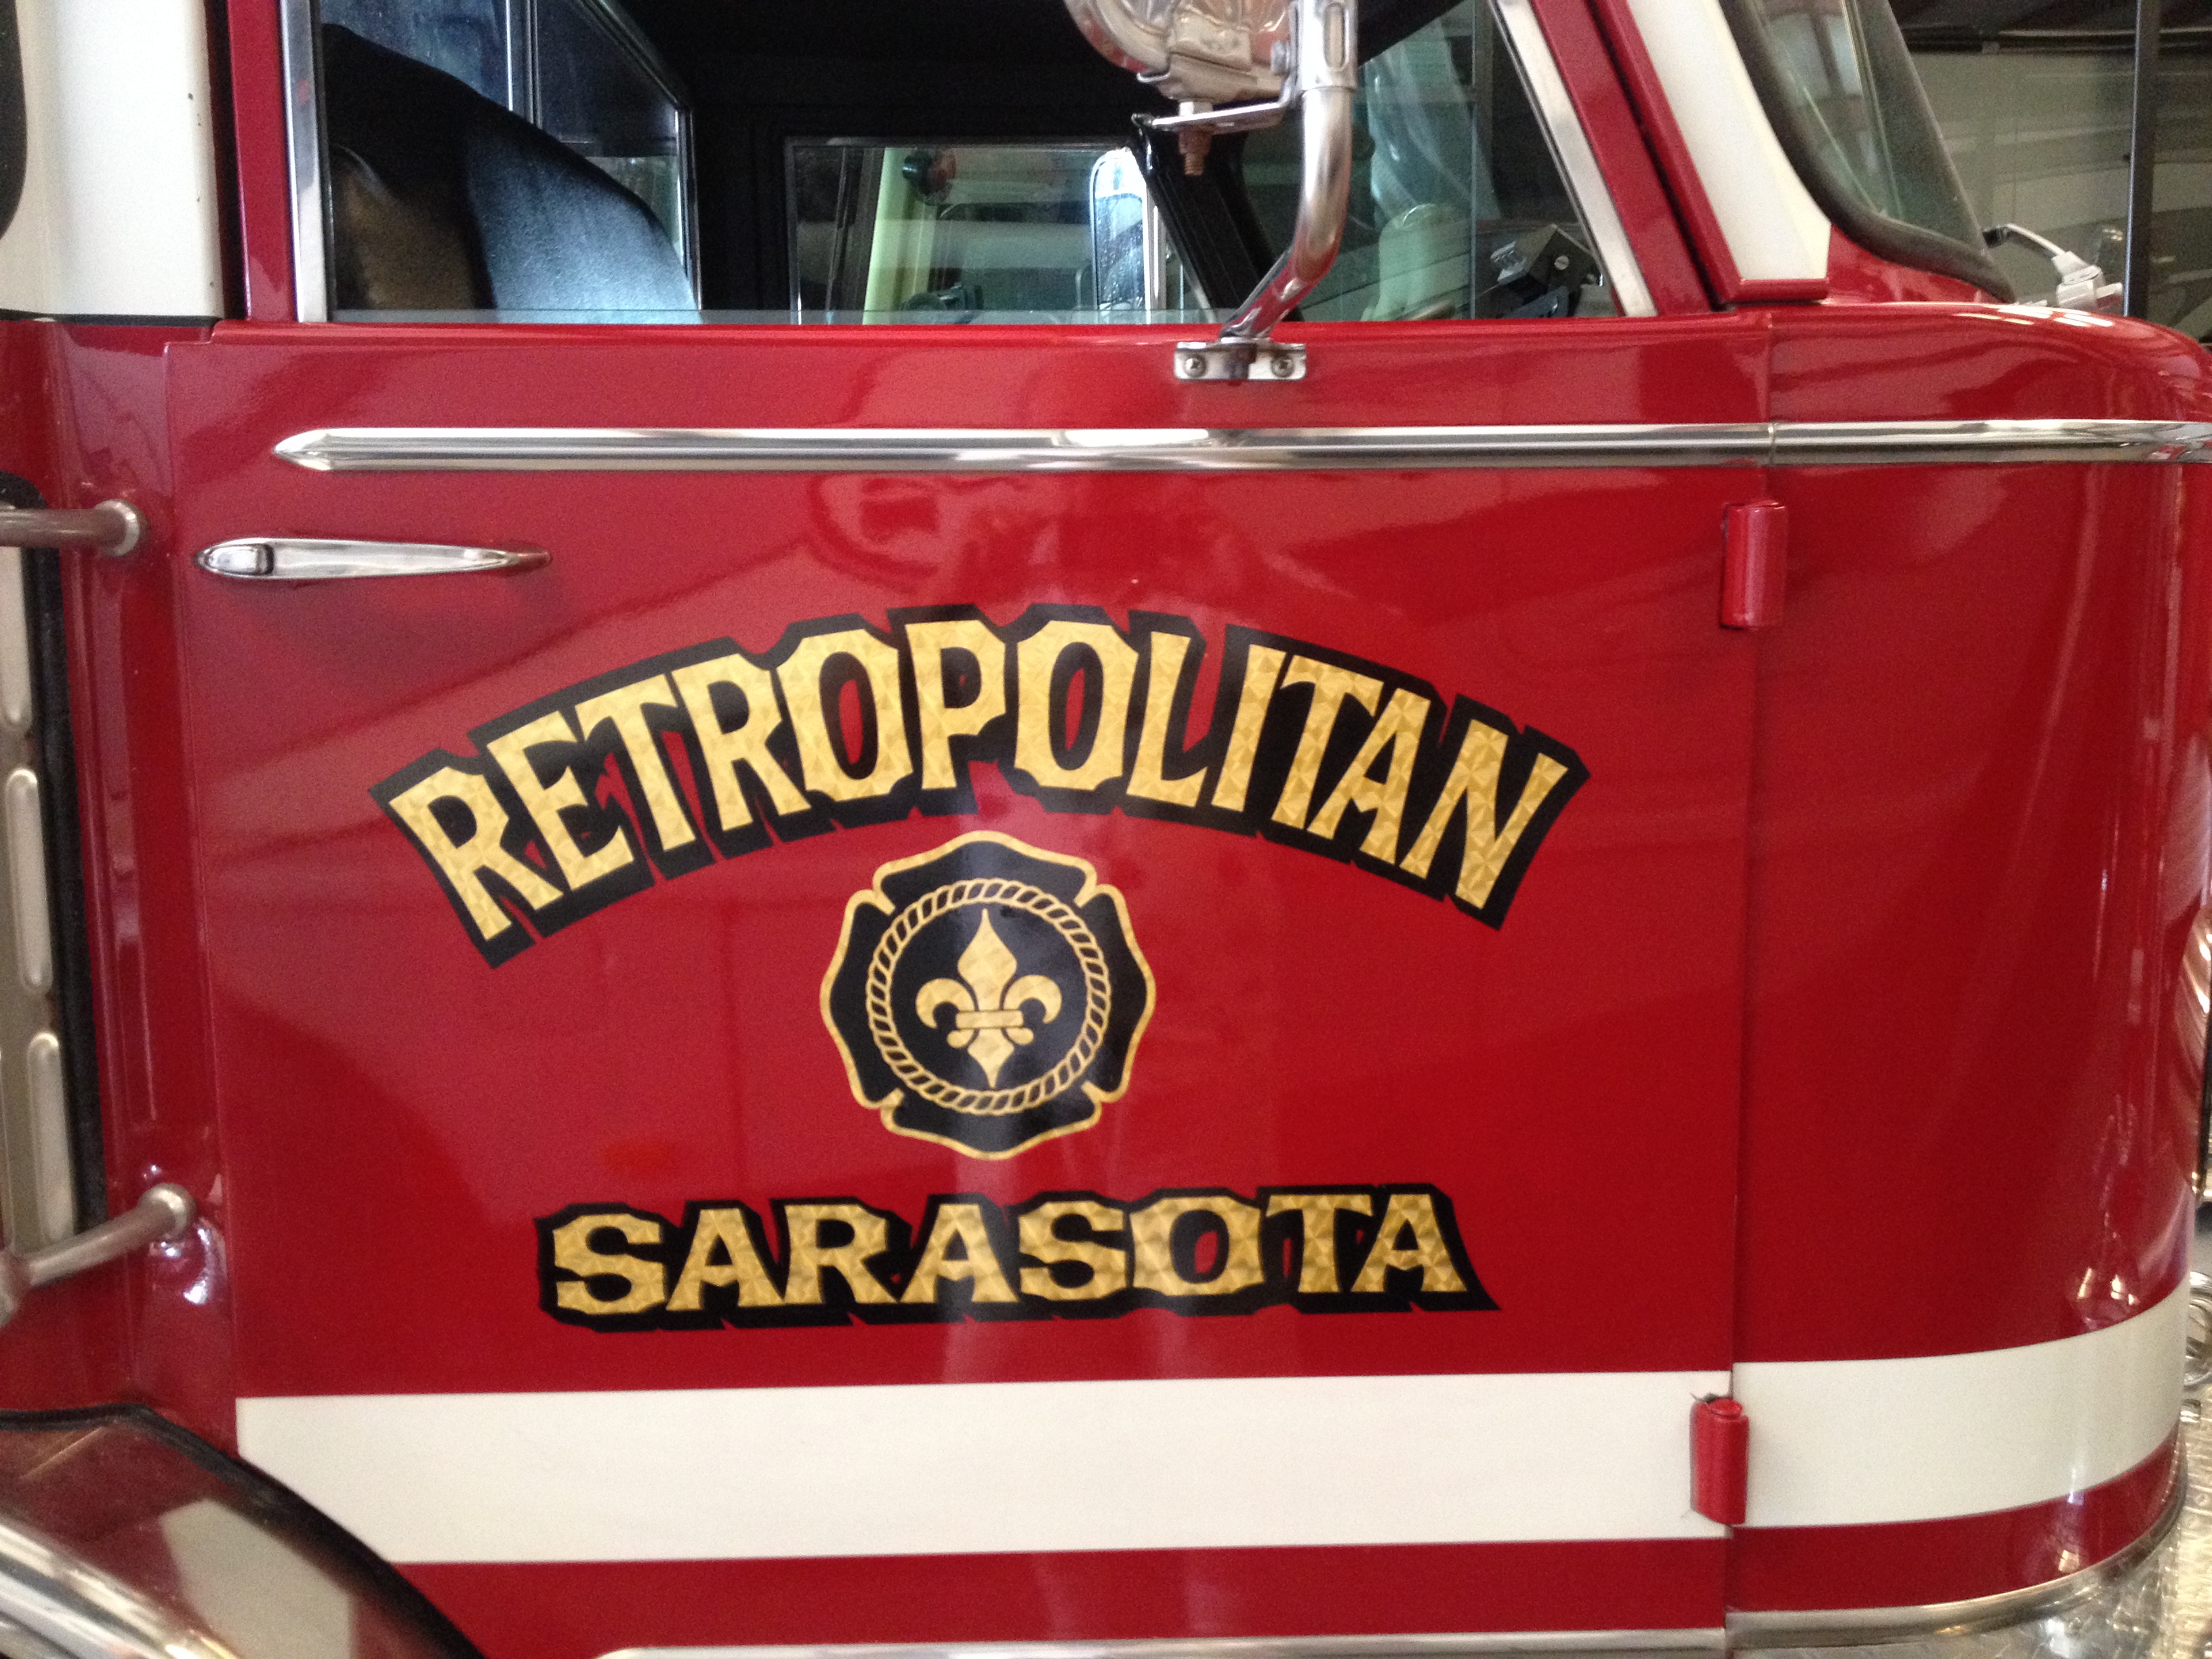 In the 70s and 80s Sarasota County FD assumed several smaller departments.  The department was branded as Metropolitan Sarasota FD, or just METRO.   My friend Tom Hutton in New York had a collection of ambulances he called Retro Ambulance.  In my mind, Metro and Retro merged.